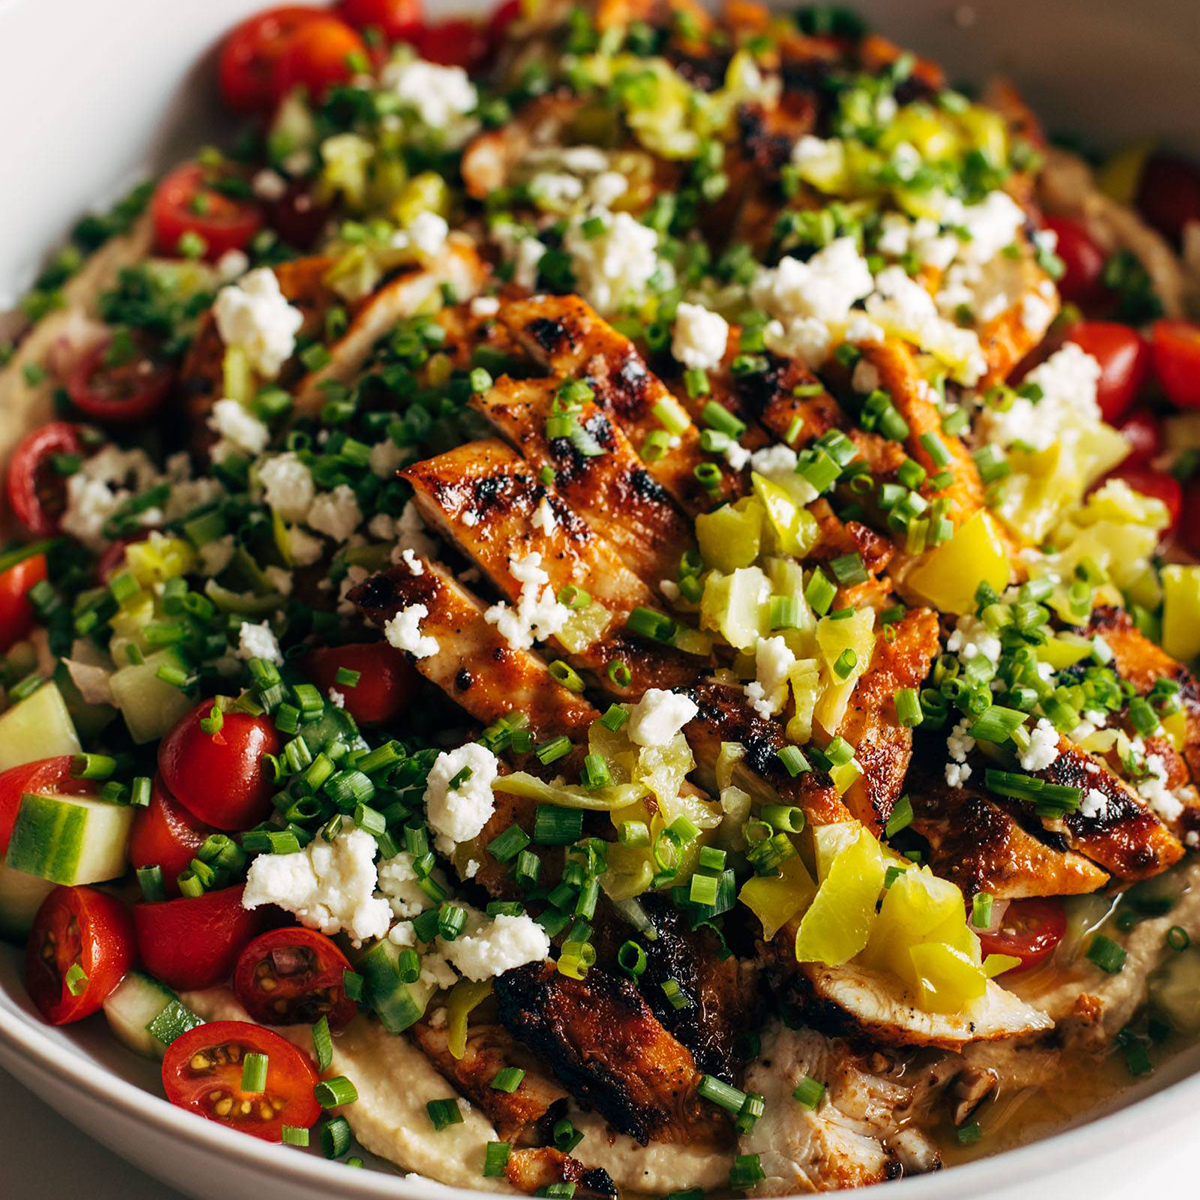 Grilled chicken in a bowl with hummus, herbs, and cheese.